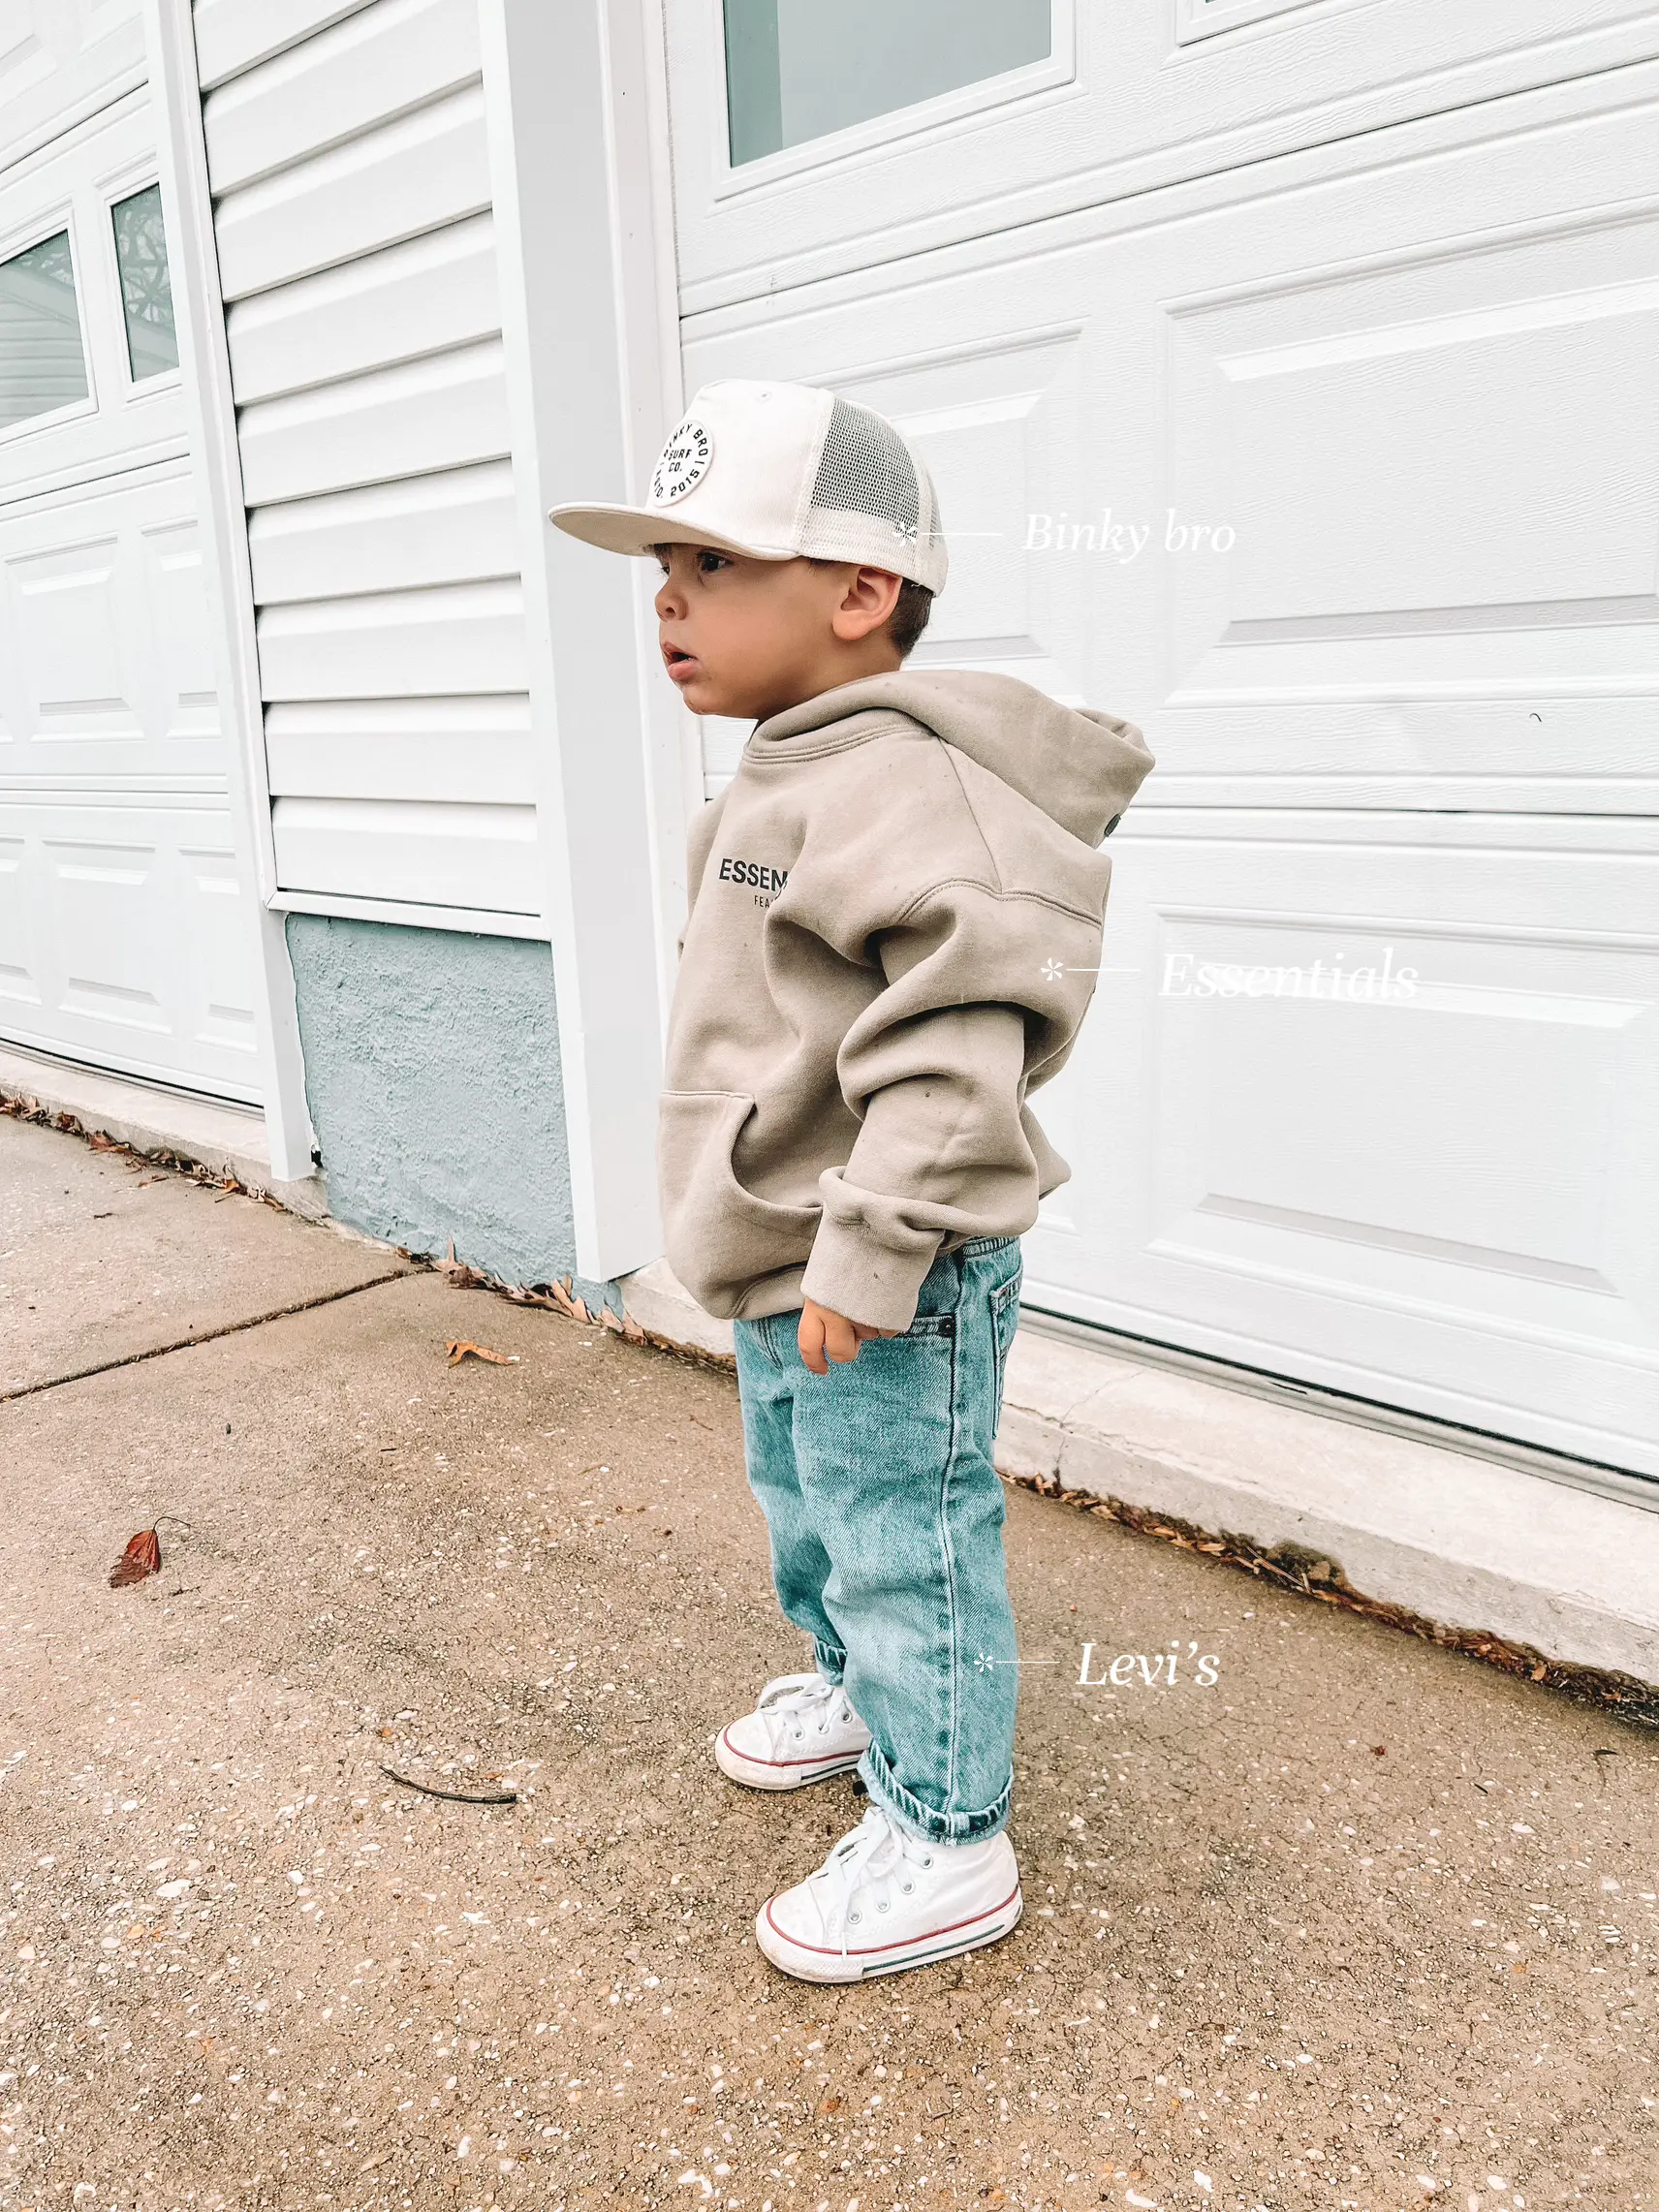 Bro Snapback  Baby boy fall outfits, Baby boy outfits swag, Toddler boy  fashion